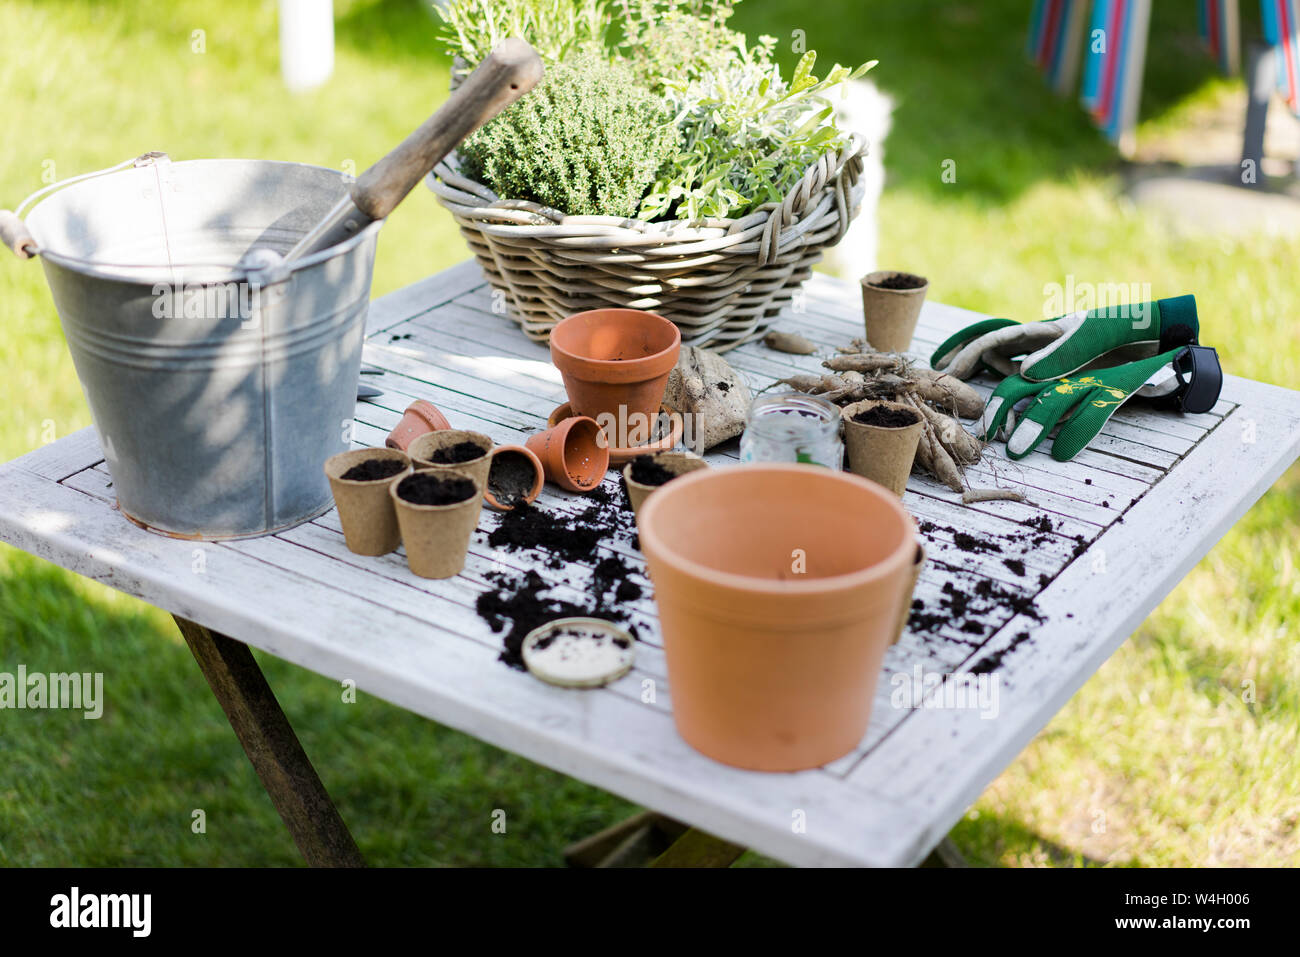 Gardening accessories on table Stock Photo